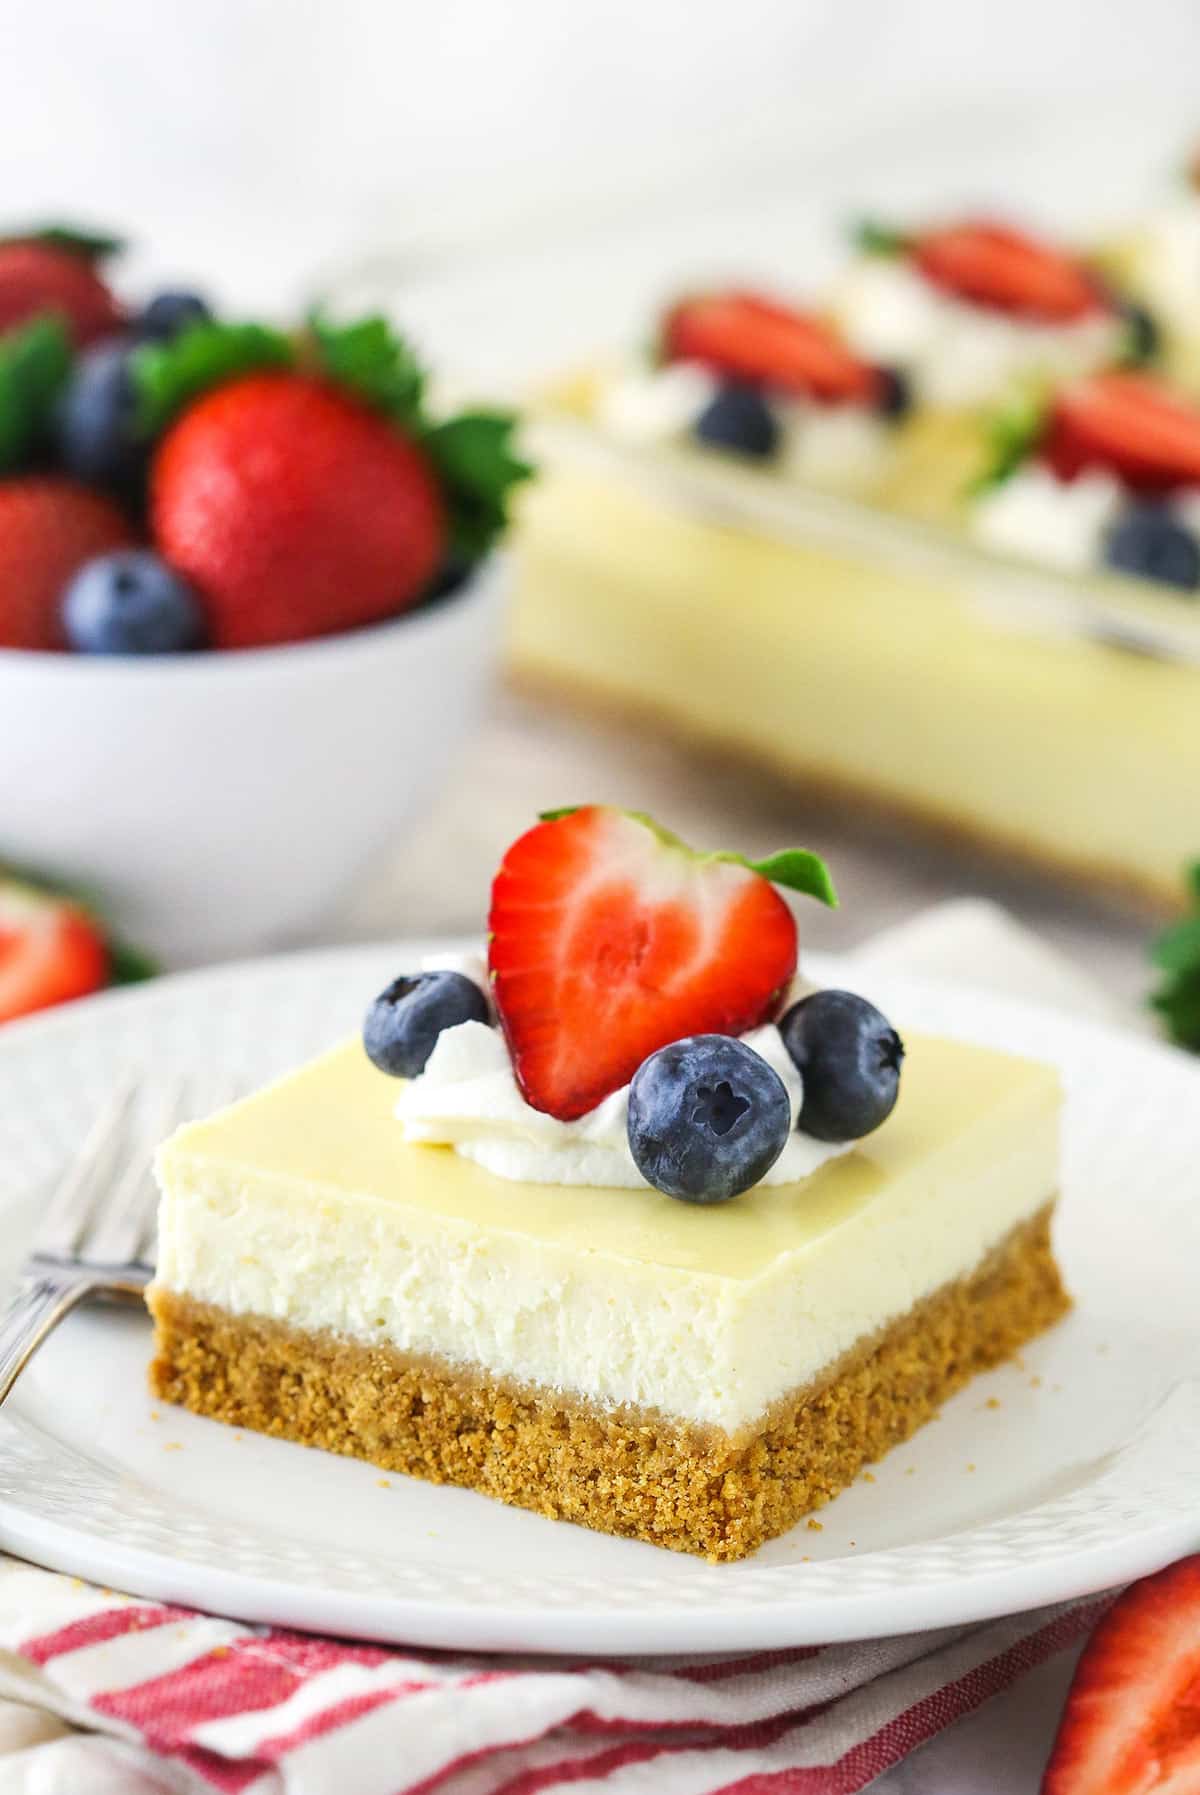 A slice of hassle free, easy cheesecake on a plate with a fork.